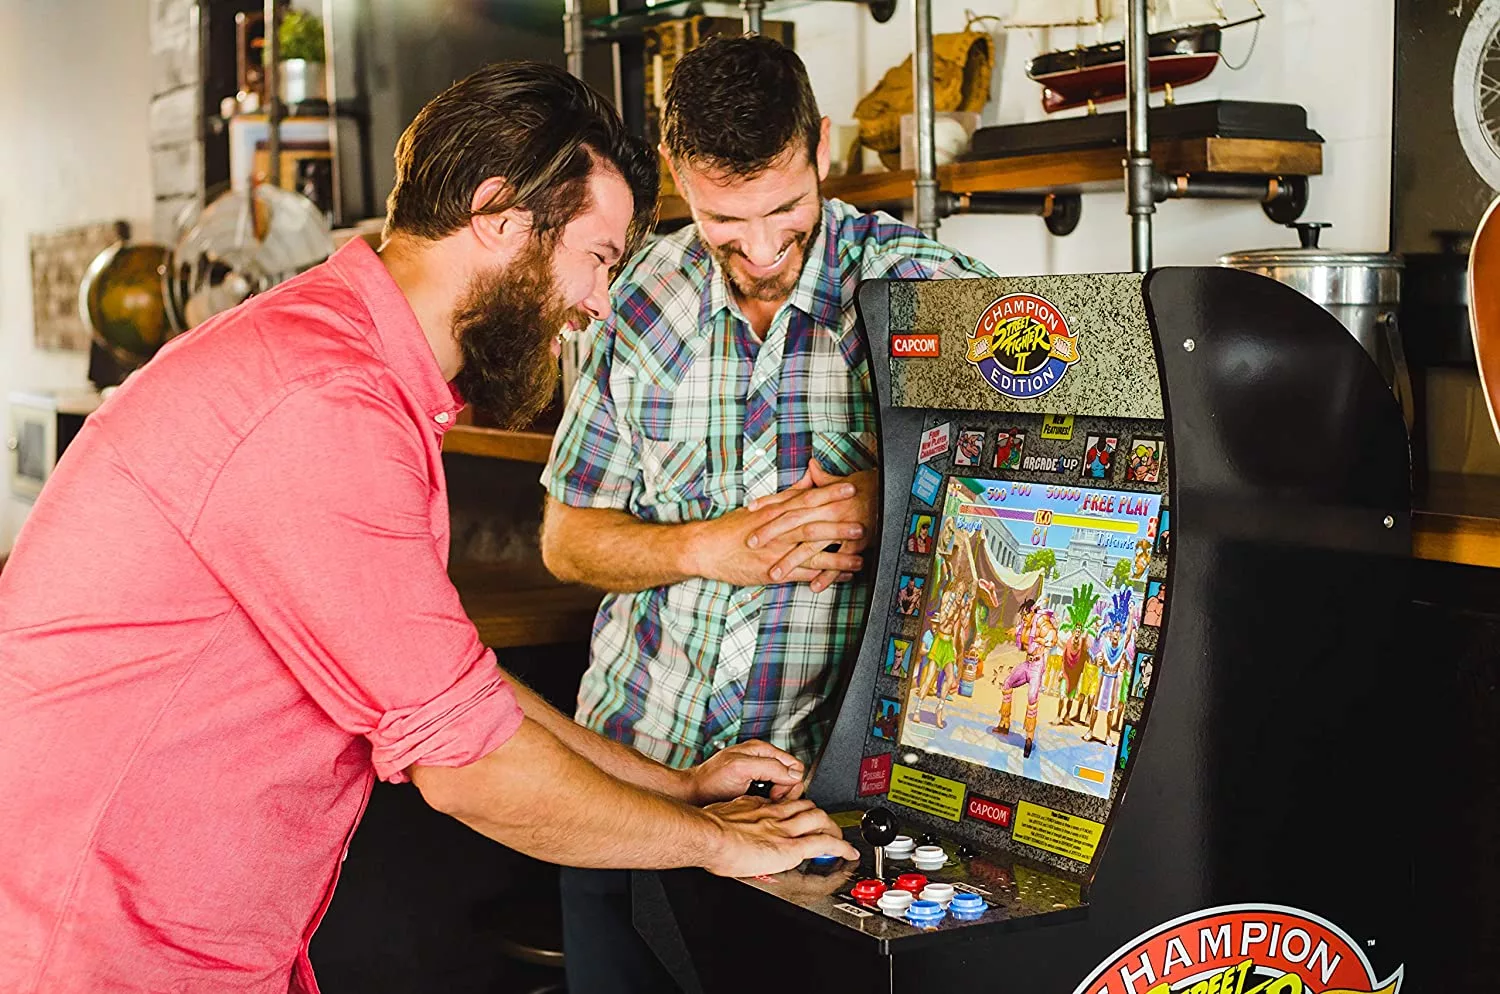 Two guys playing on the Mini 4 Foot Retro Arcade Machine in an office